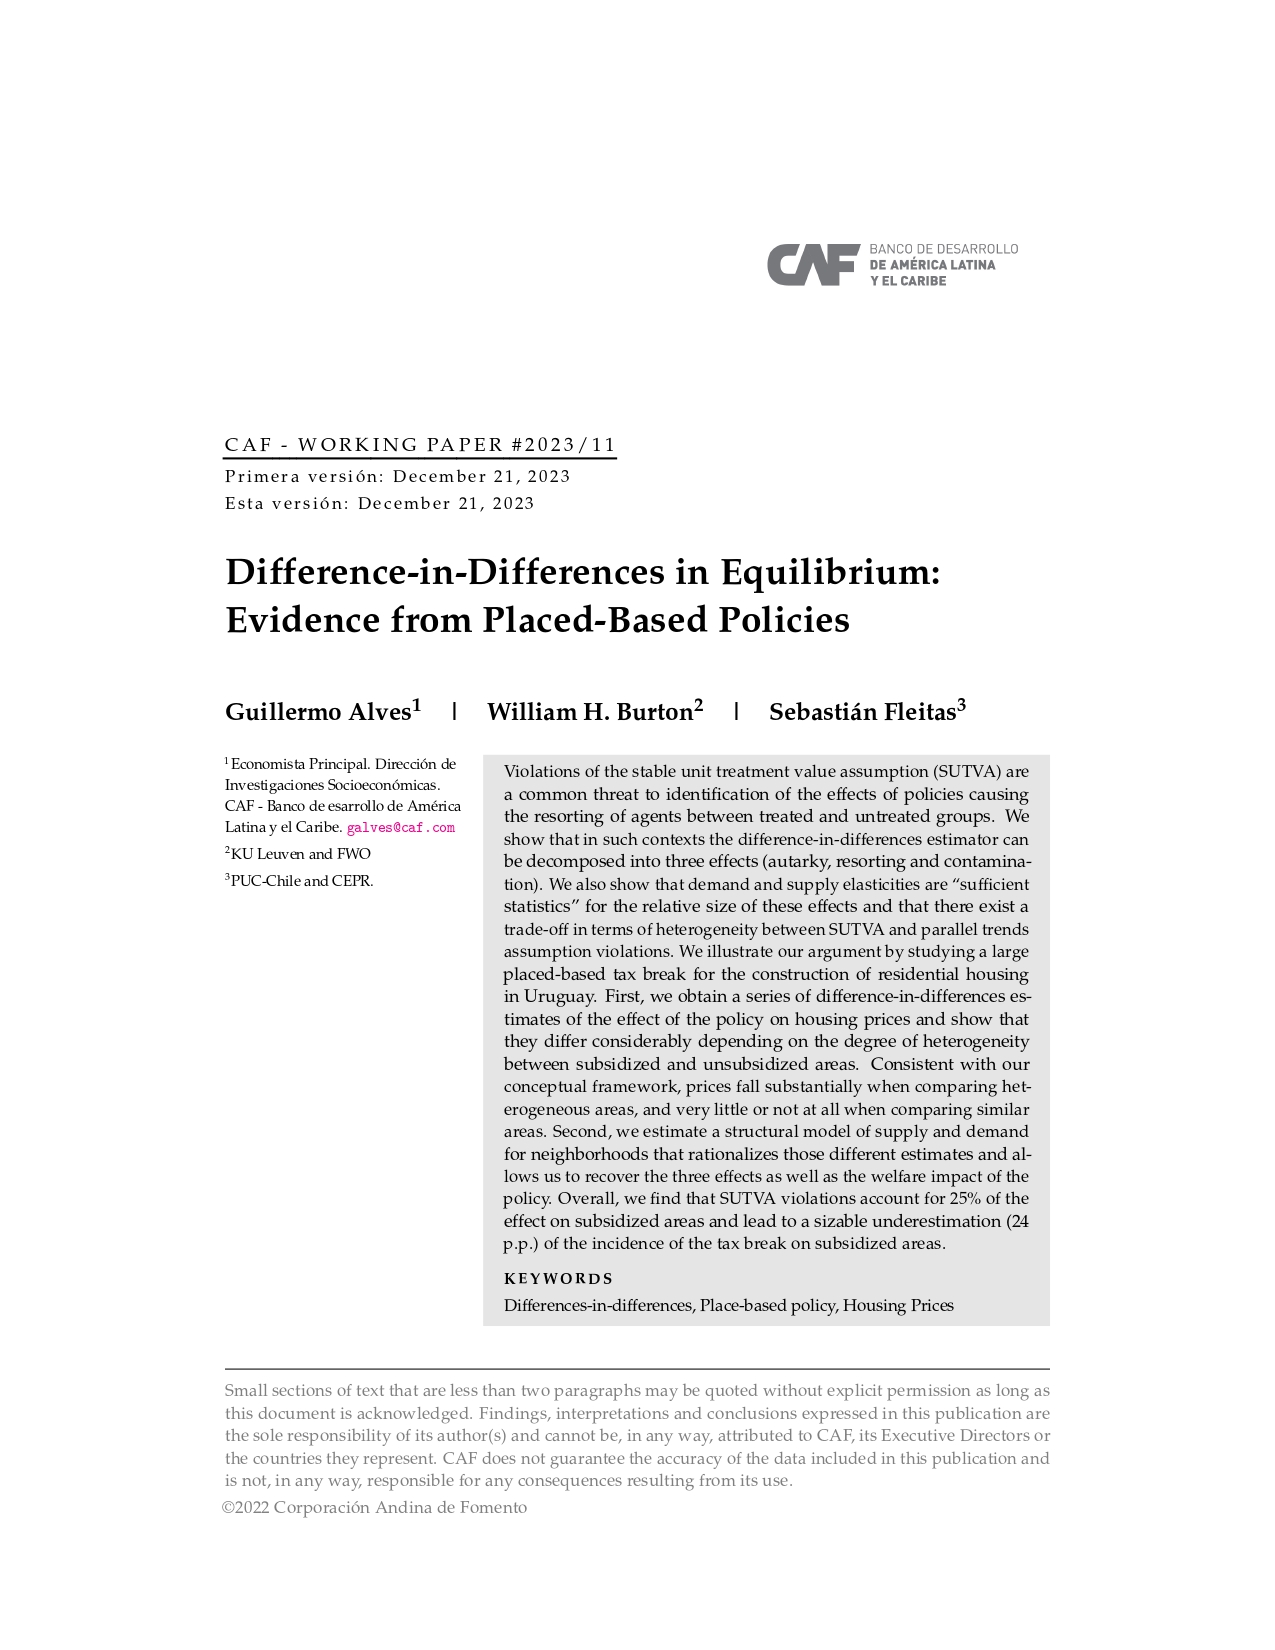 Difference-in-Differences in Equilibrium: Evidence from Placed-Based Policies